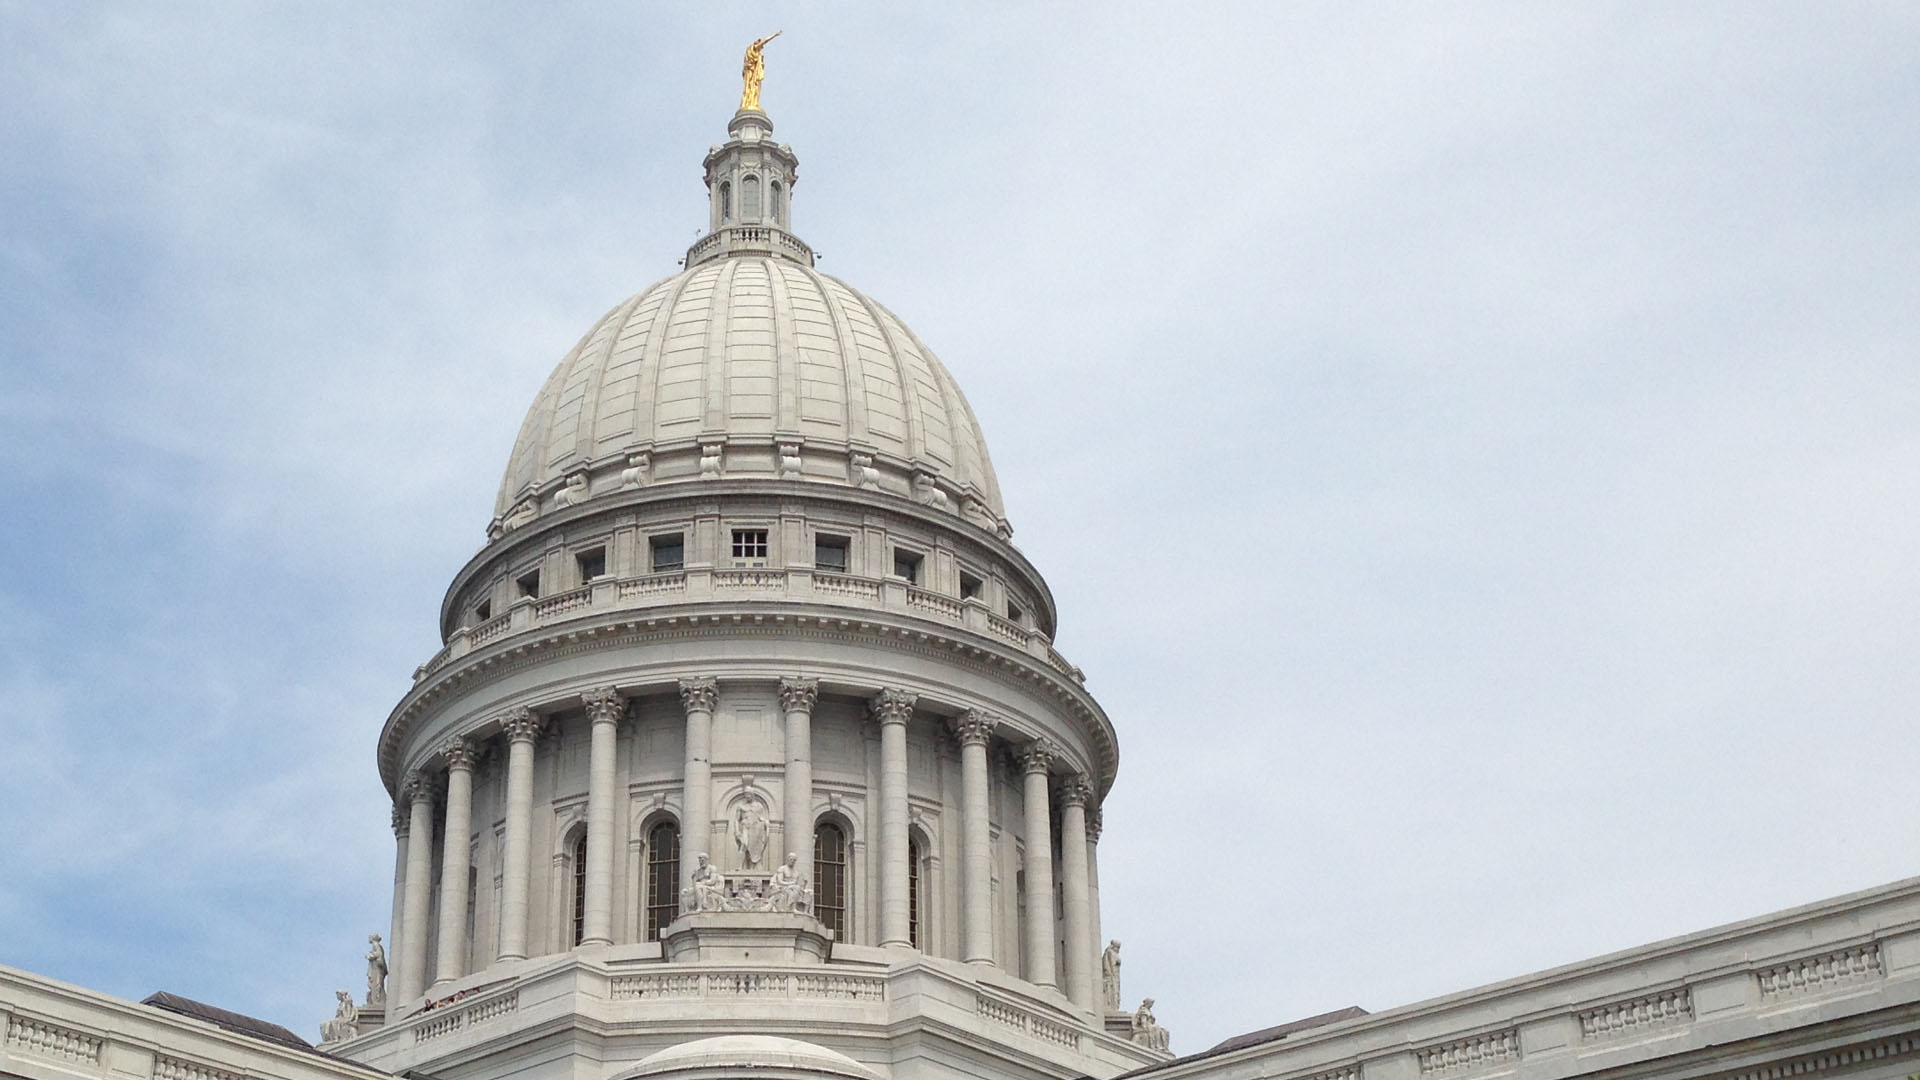 View of the Wisconsin Capitol dome.